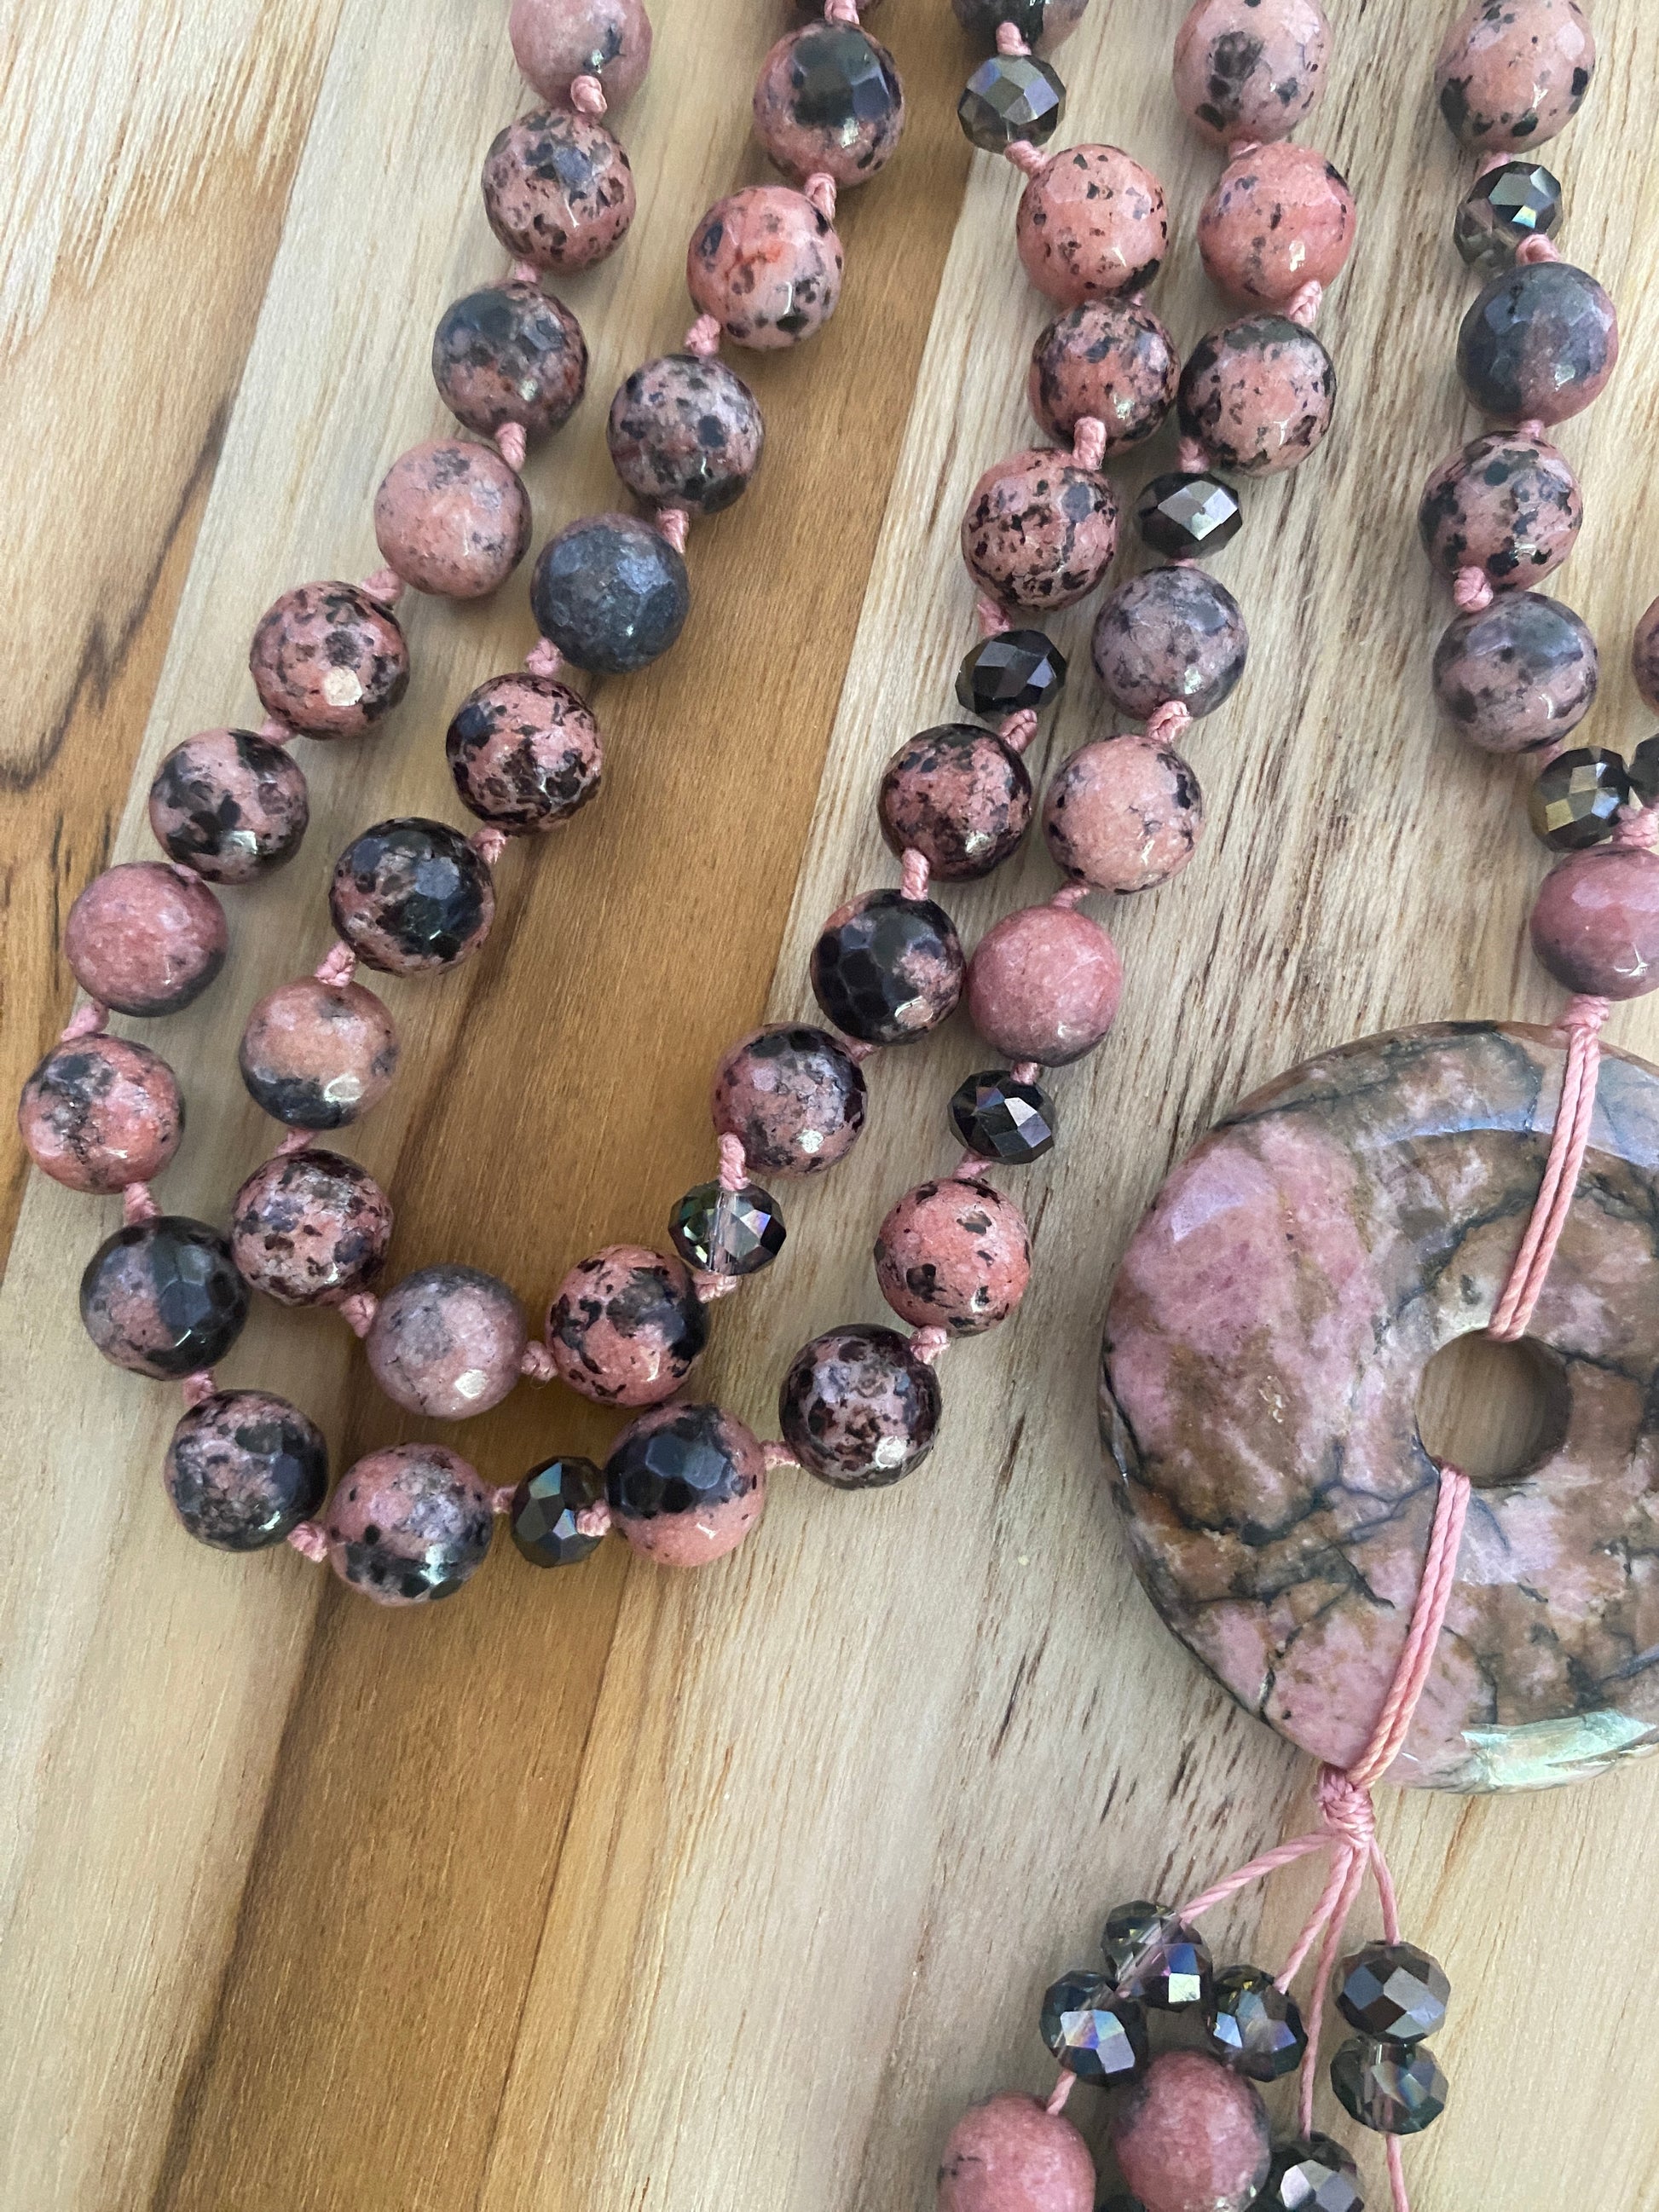 28" Long Pink and Black Rhodonite Donut Necklace with Faceted Rhodonite and Crystal Beads - My Urban Gems